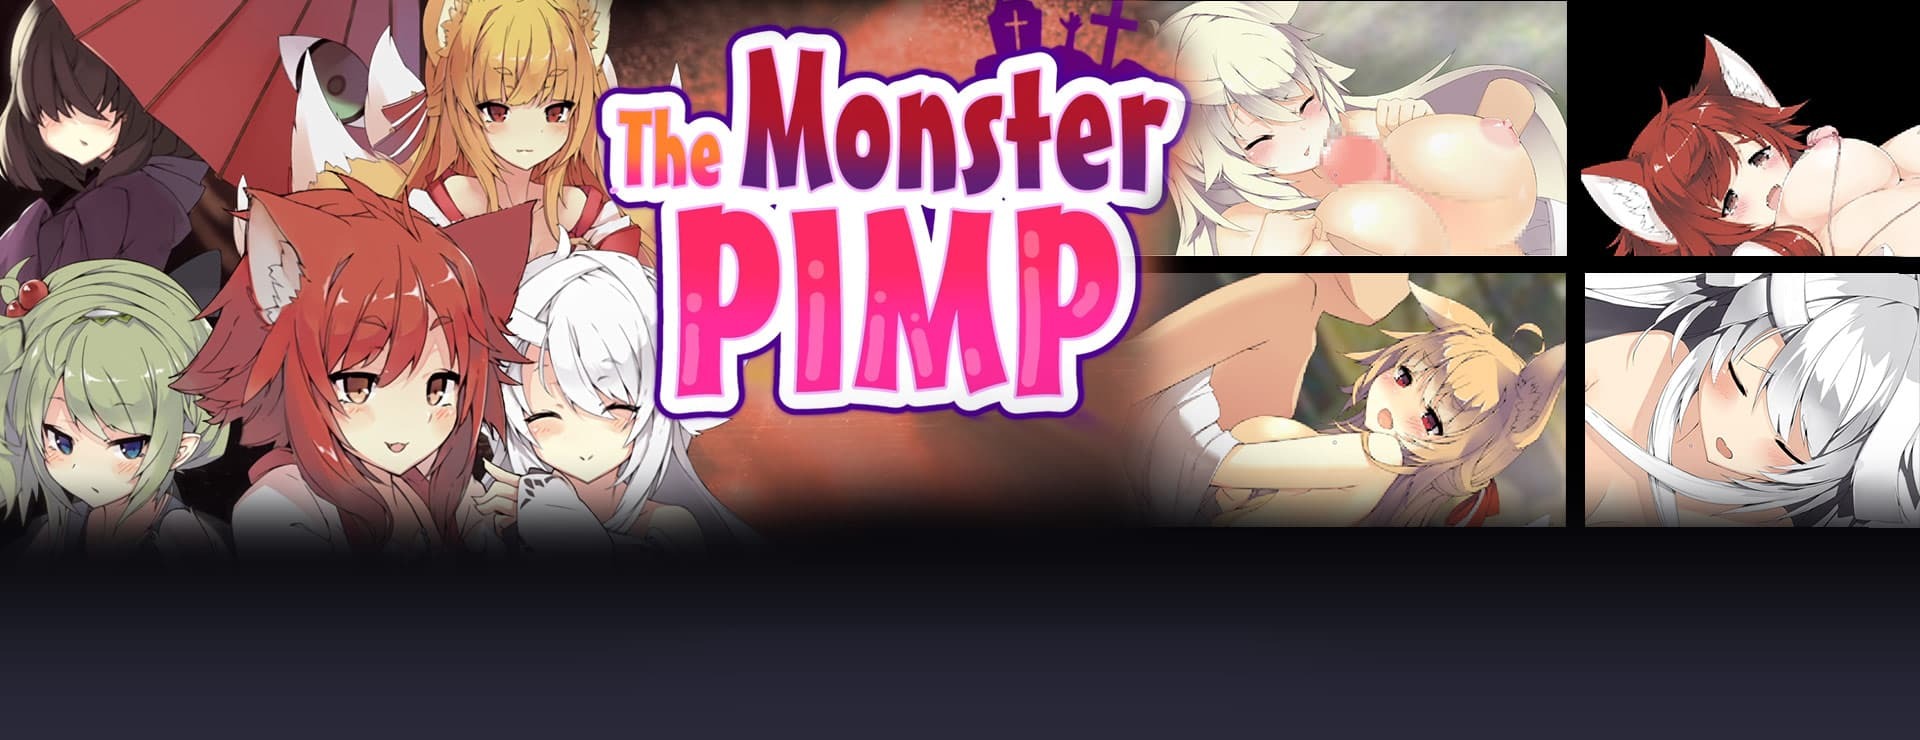 The Monster PIMP - RPG Juego